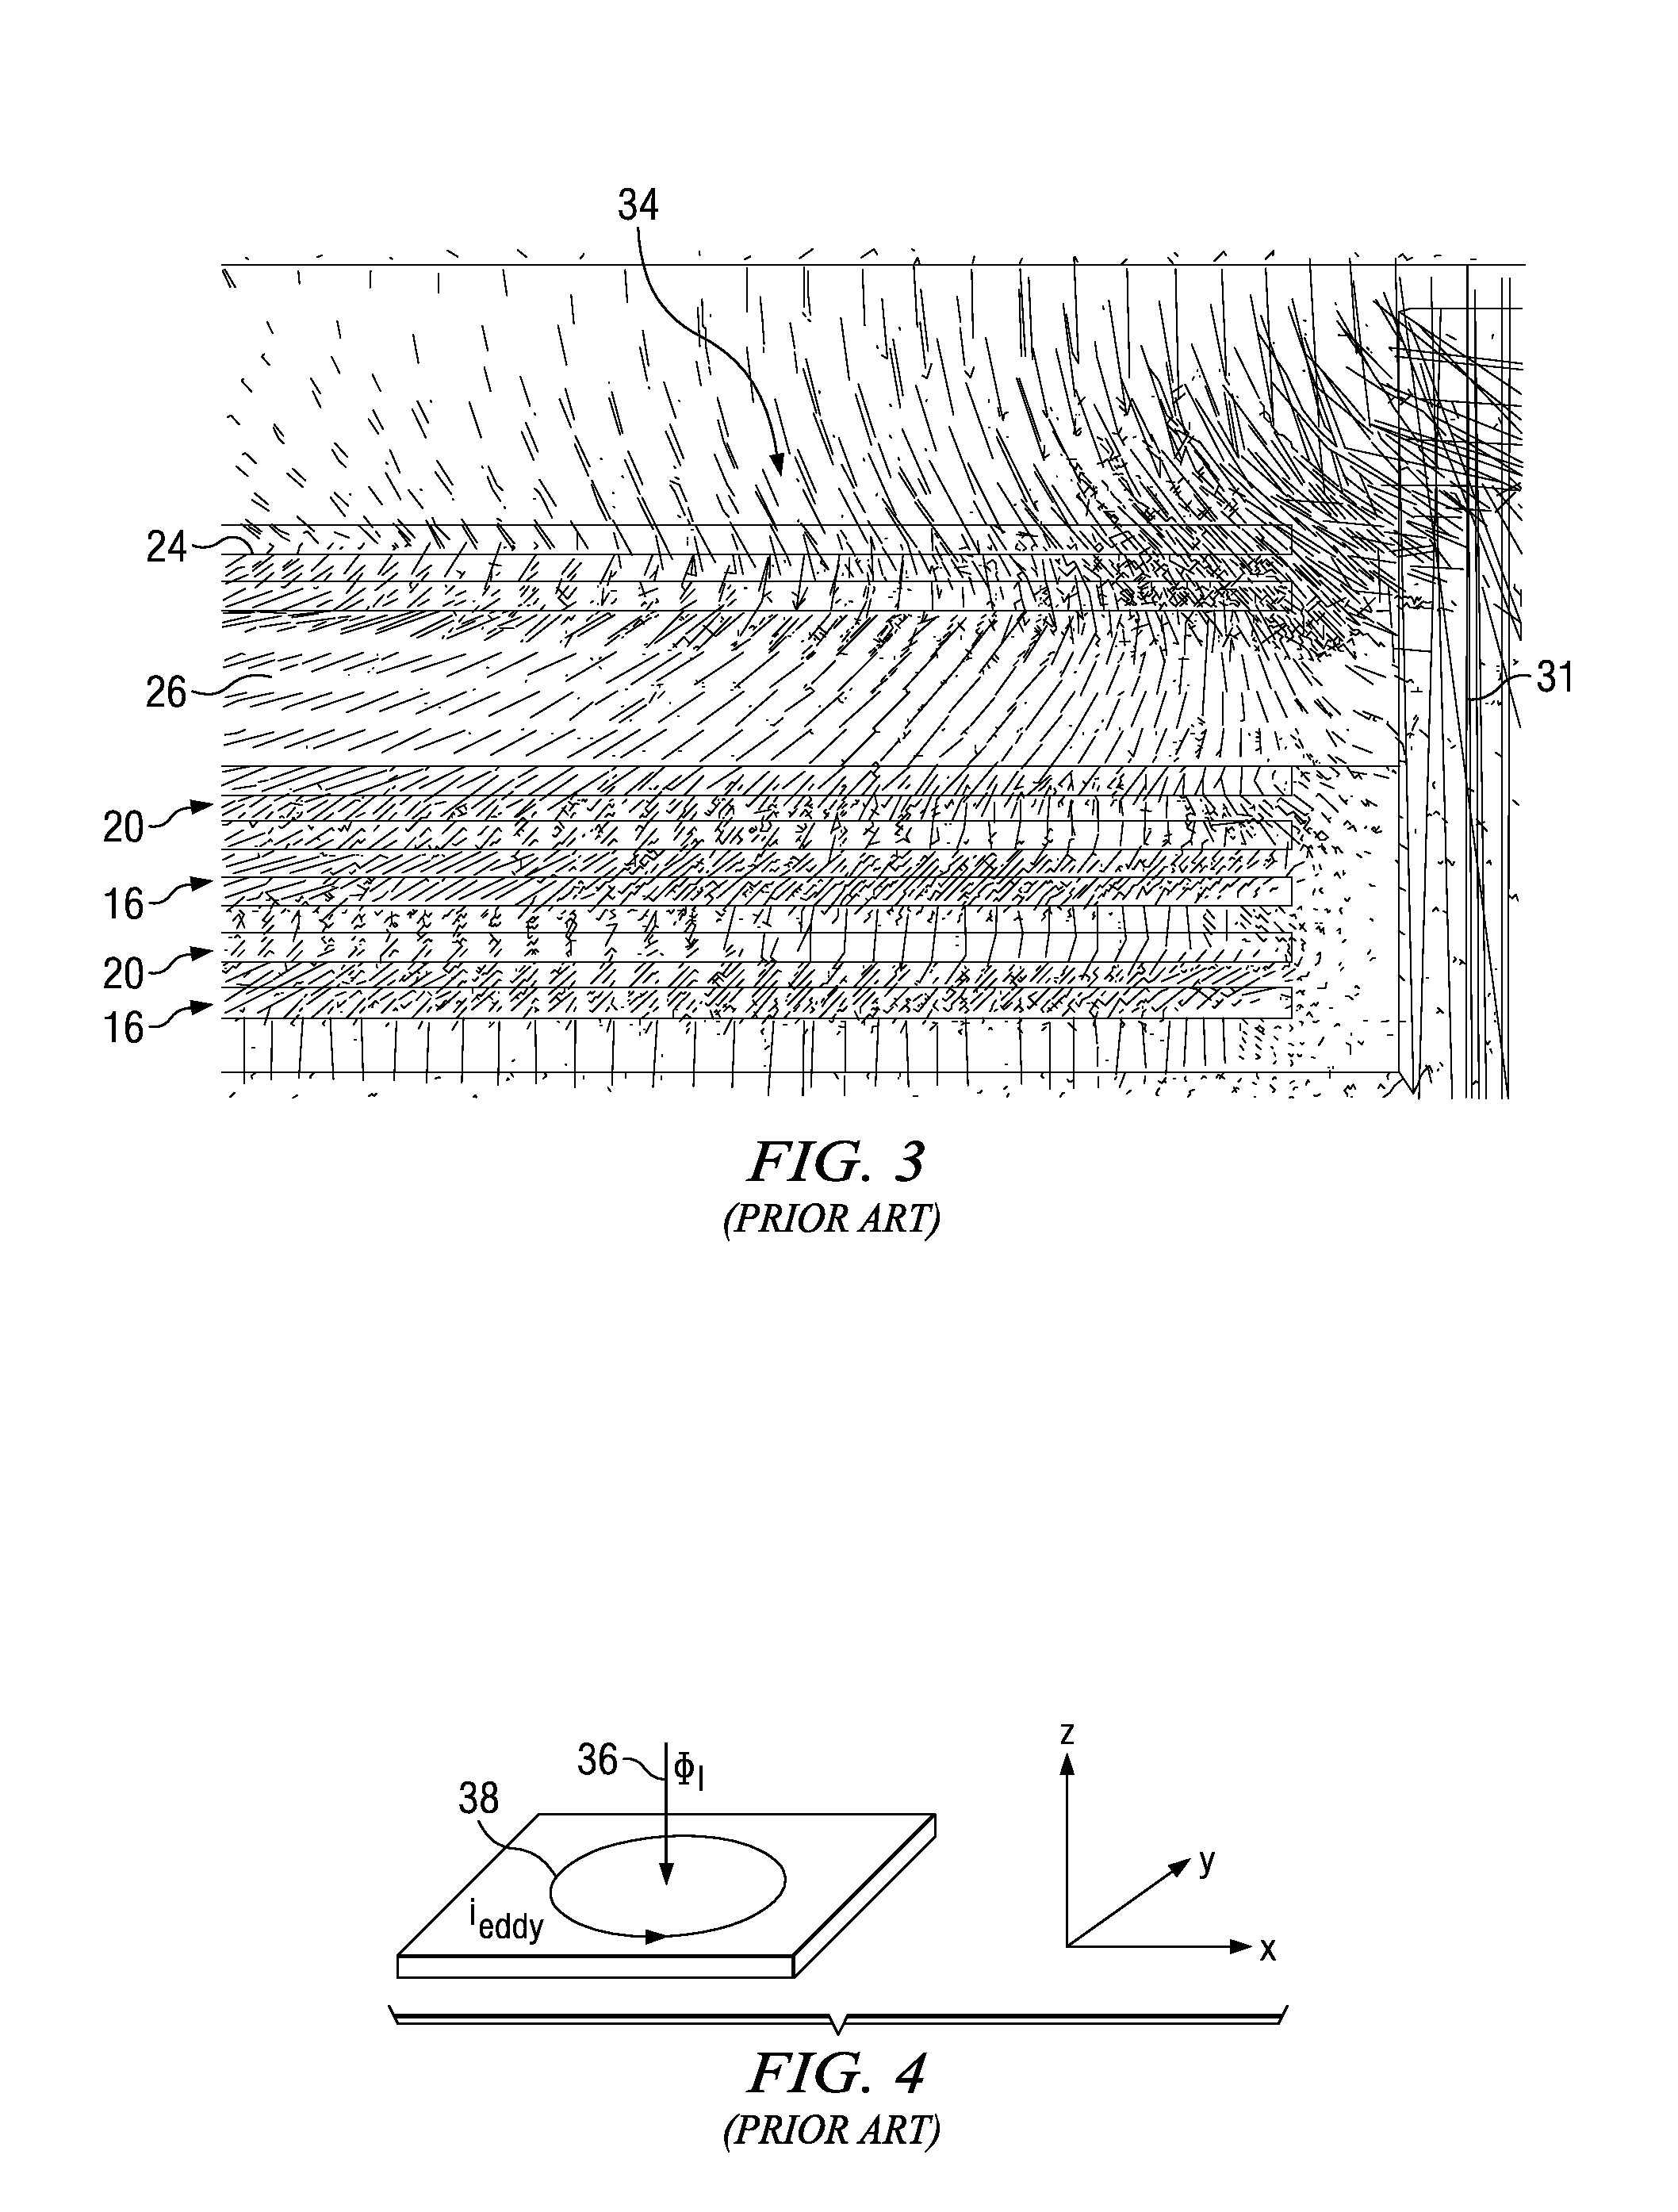 Winding structure for efficient switch-mode power converters